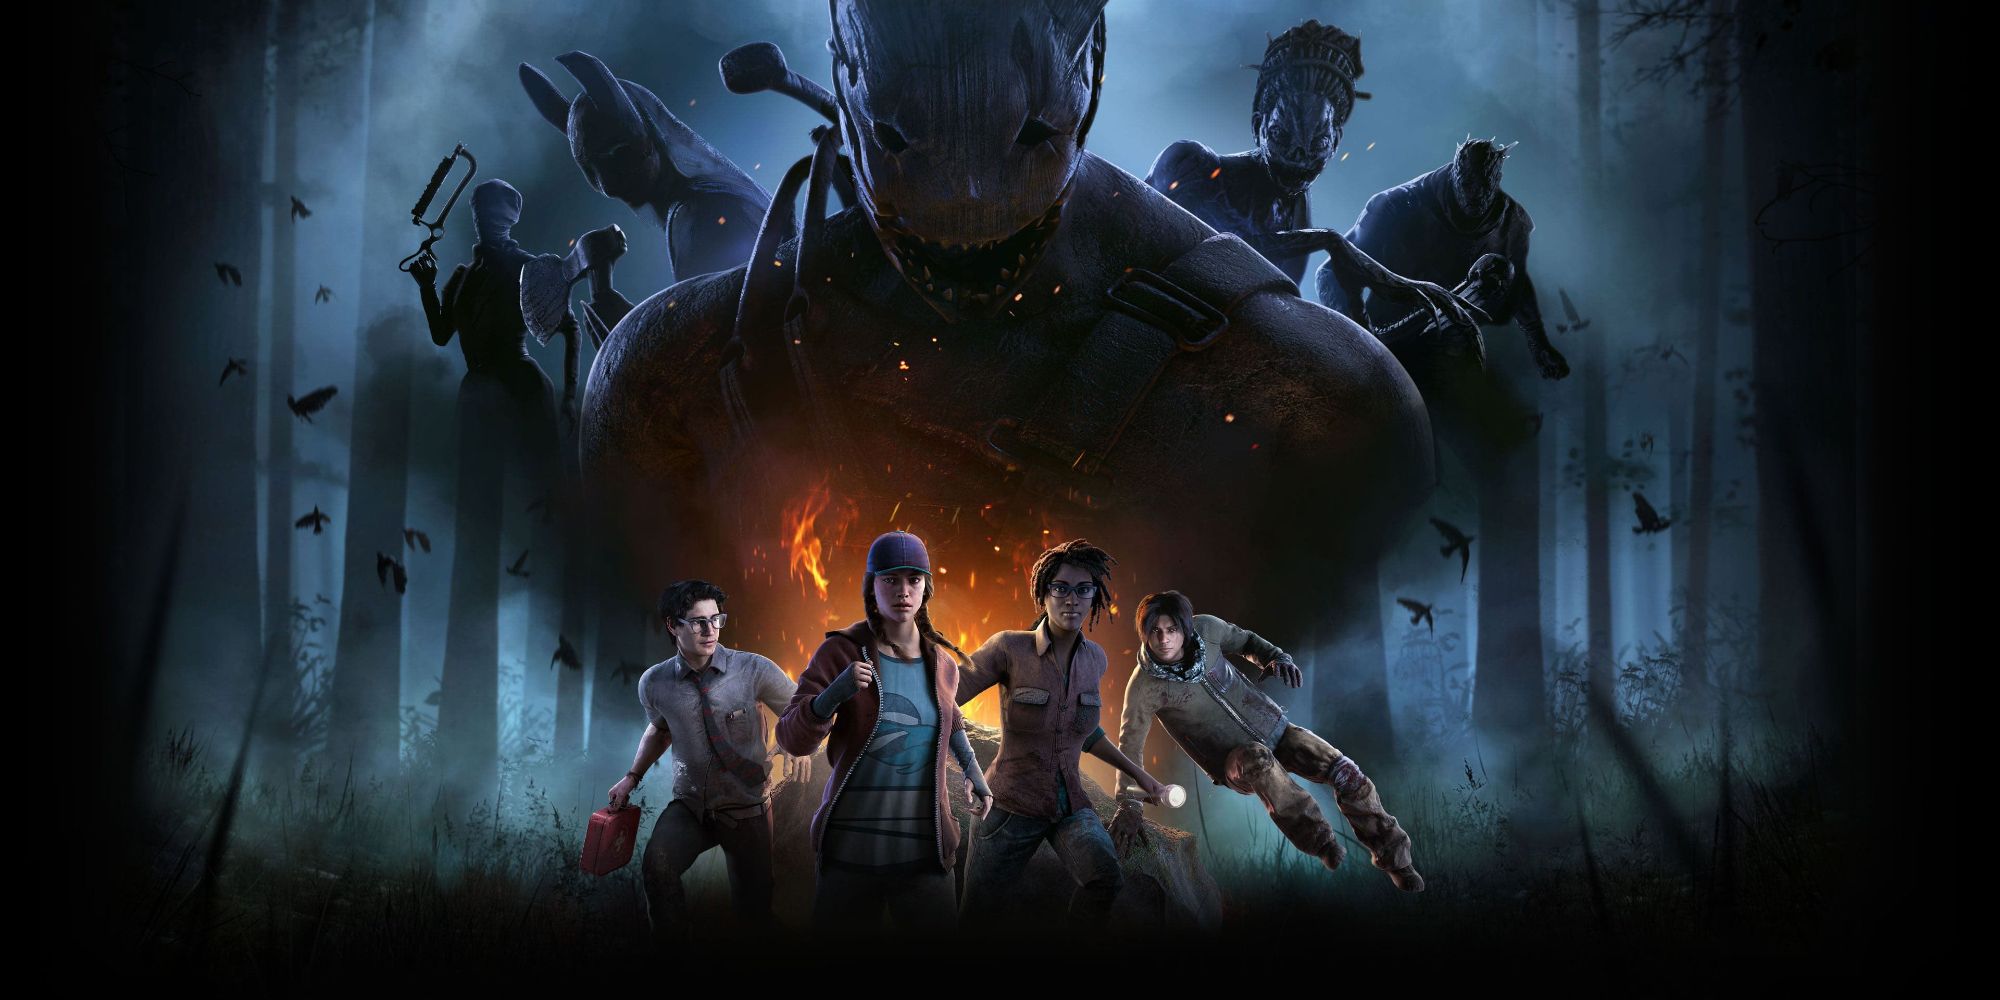 Key art for Dead By Daylight, featuring four survivors and a few of the game's killers.